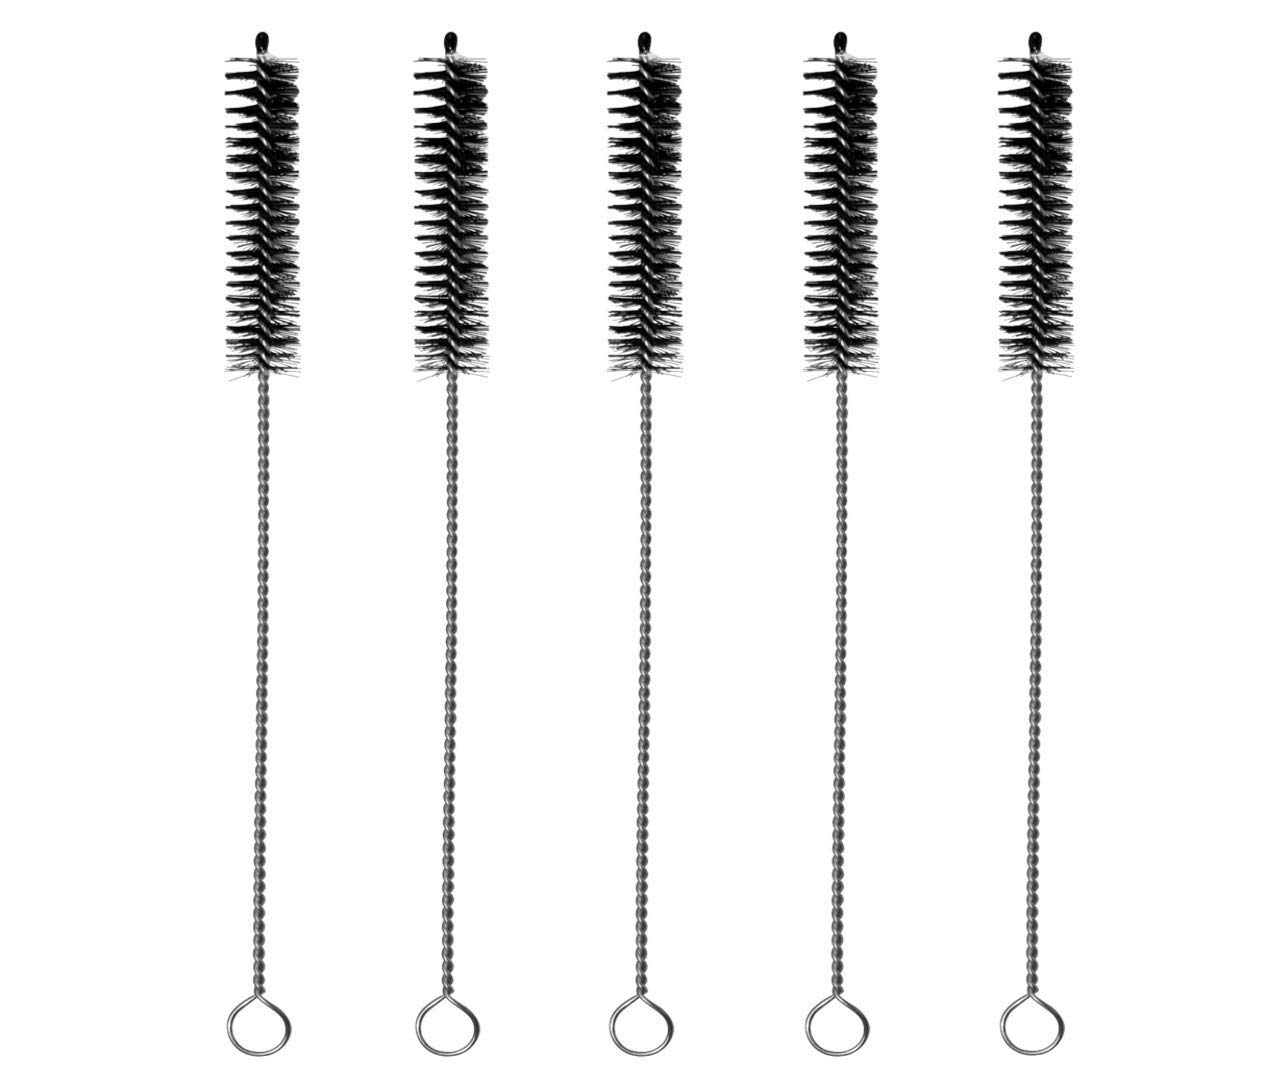 Axensory Set of 5 Straw Cleaner Brushes of 15 mm diameter